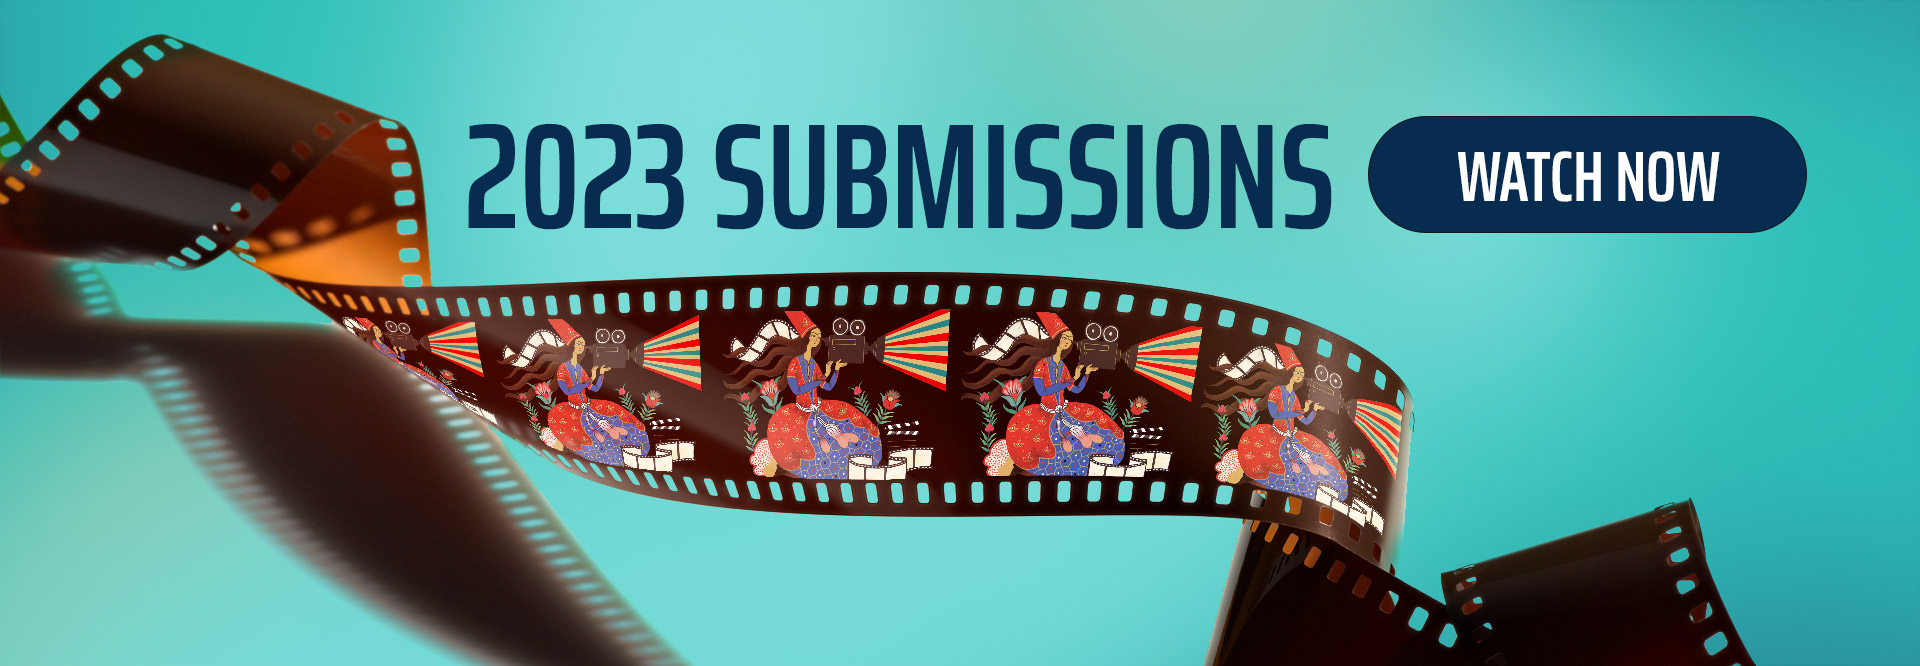 Watch 2023 Submissions